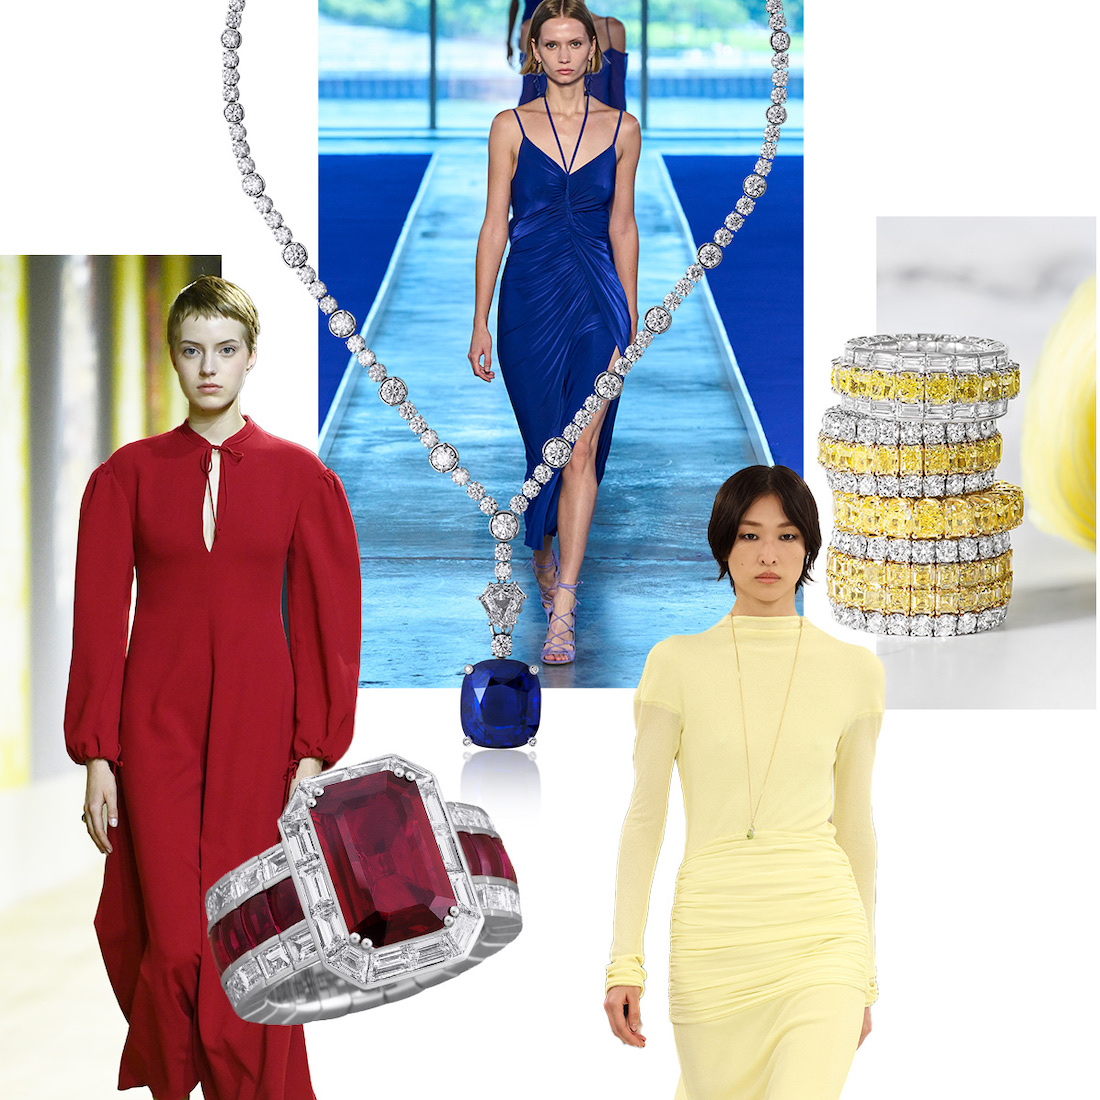 Christian Dior F/W 2022-23, PICCHIOTTI Xpandable Ruby cocktail ring, PICCHIOTTI Masterpieces Sapphire & Diamond necklace, Jason Wu S/S 2023, Givenchy F/W 2023-24, PICCHIOTTI Xpandable Fancy Yellow Diamond rings